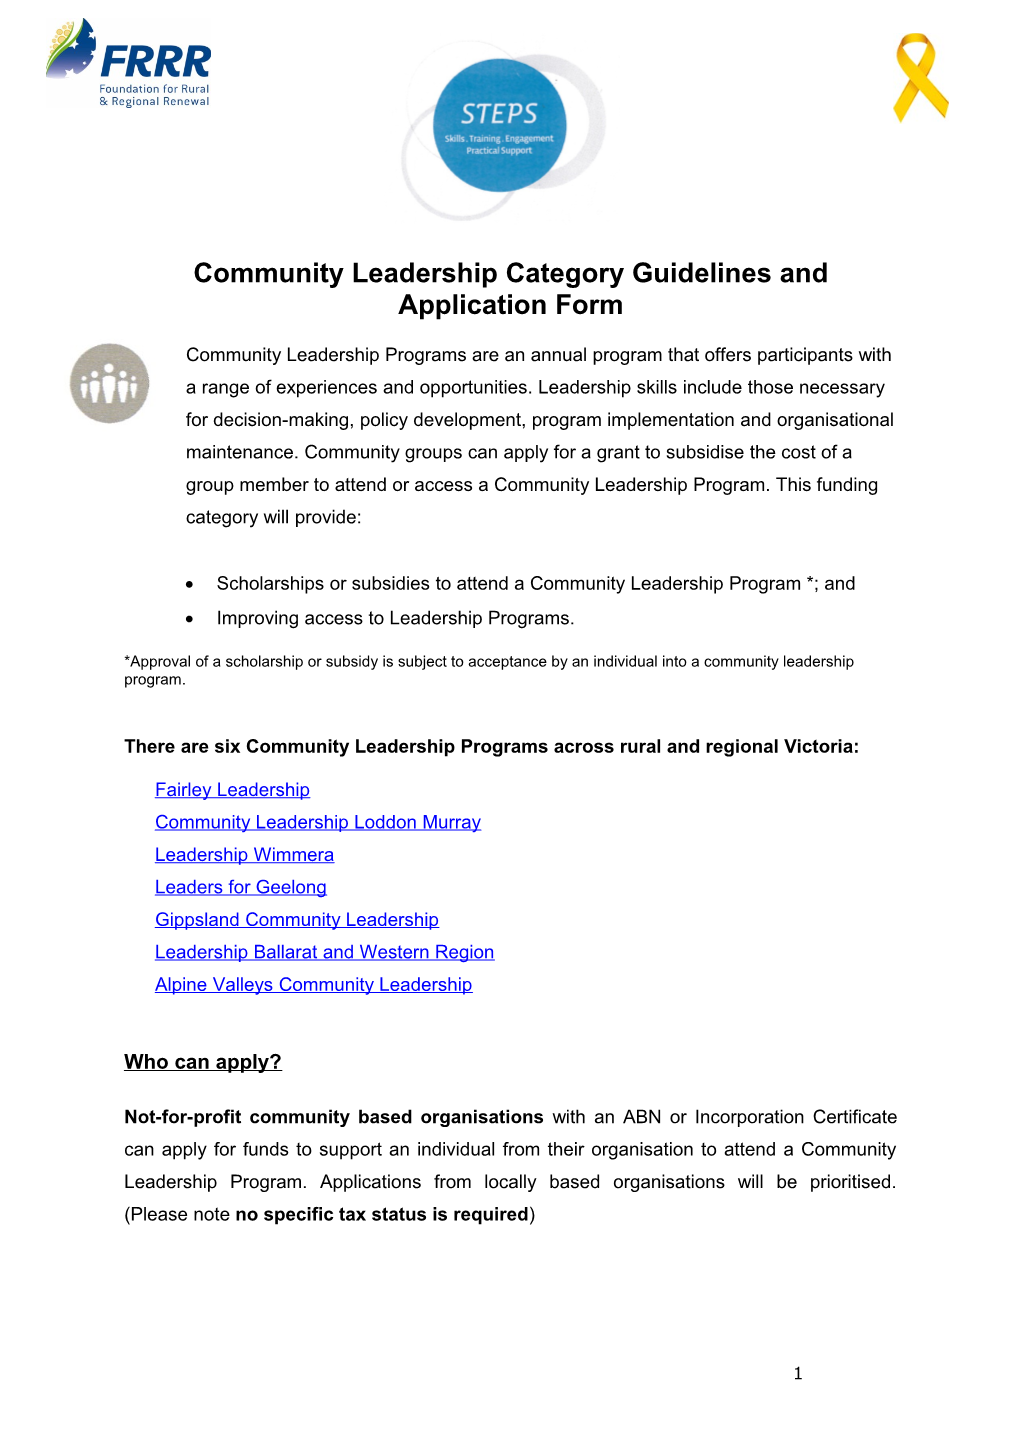 Community Leadership Category Guidelines and Application Form